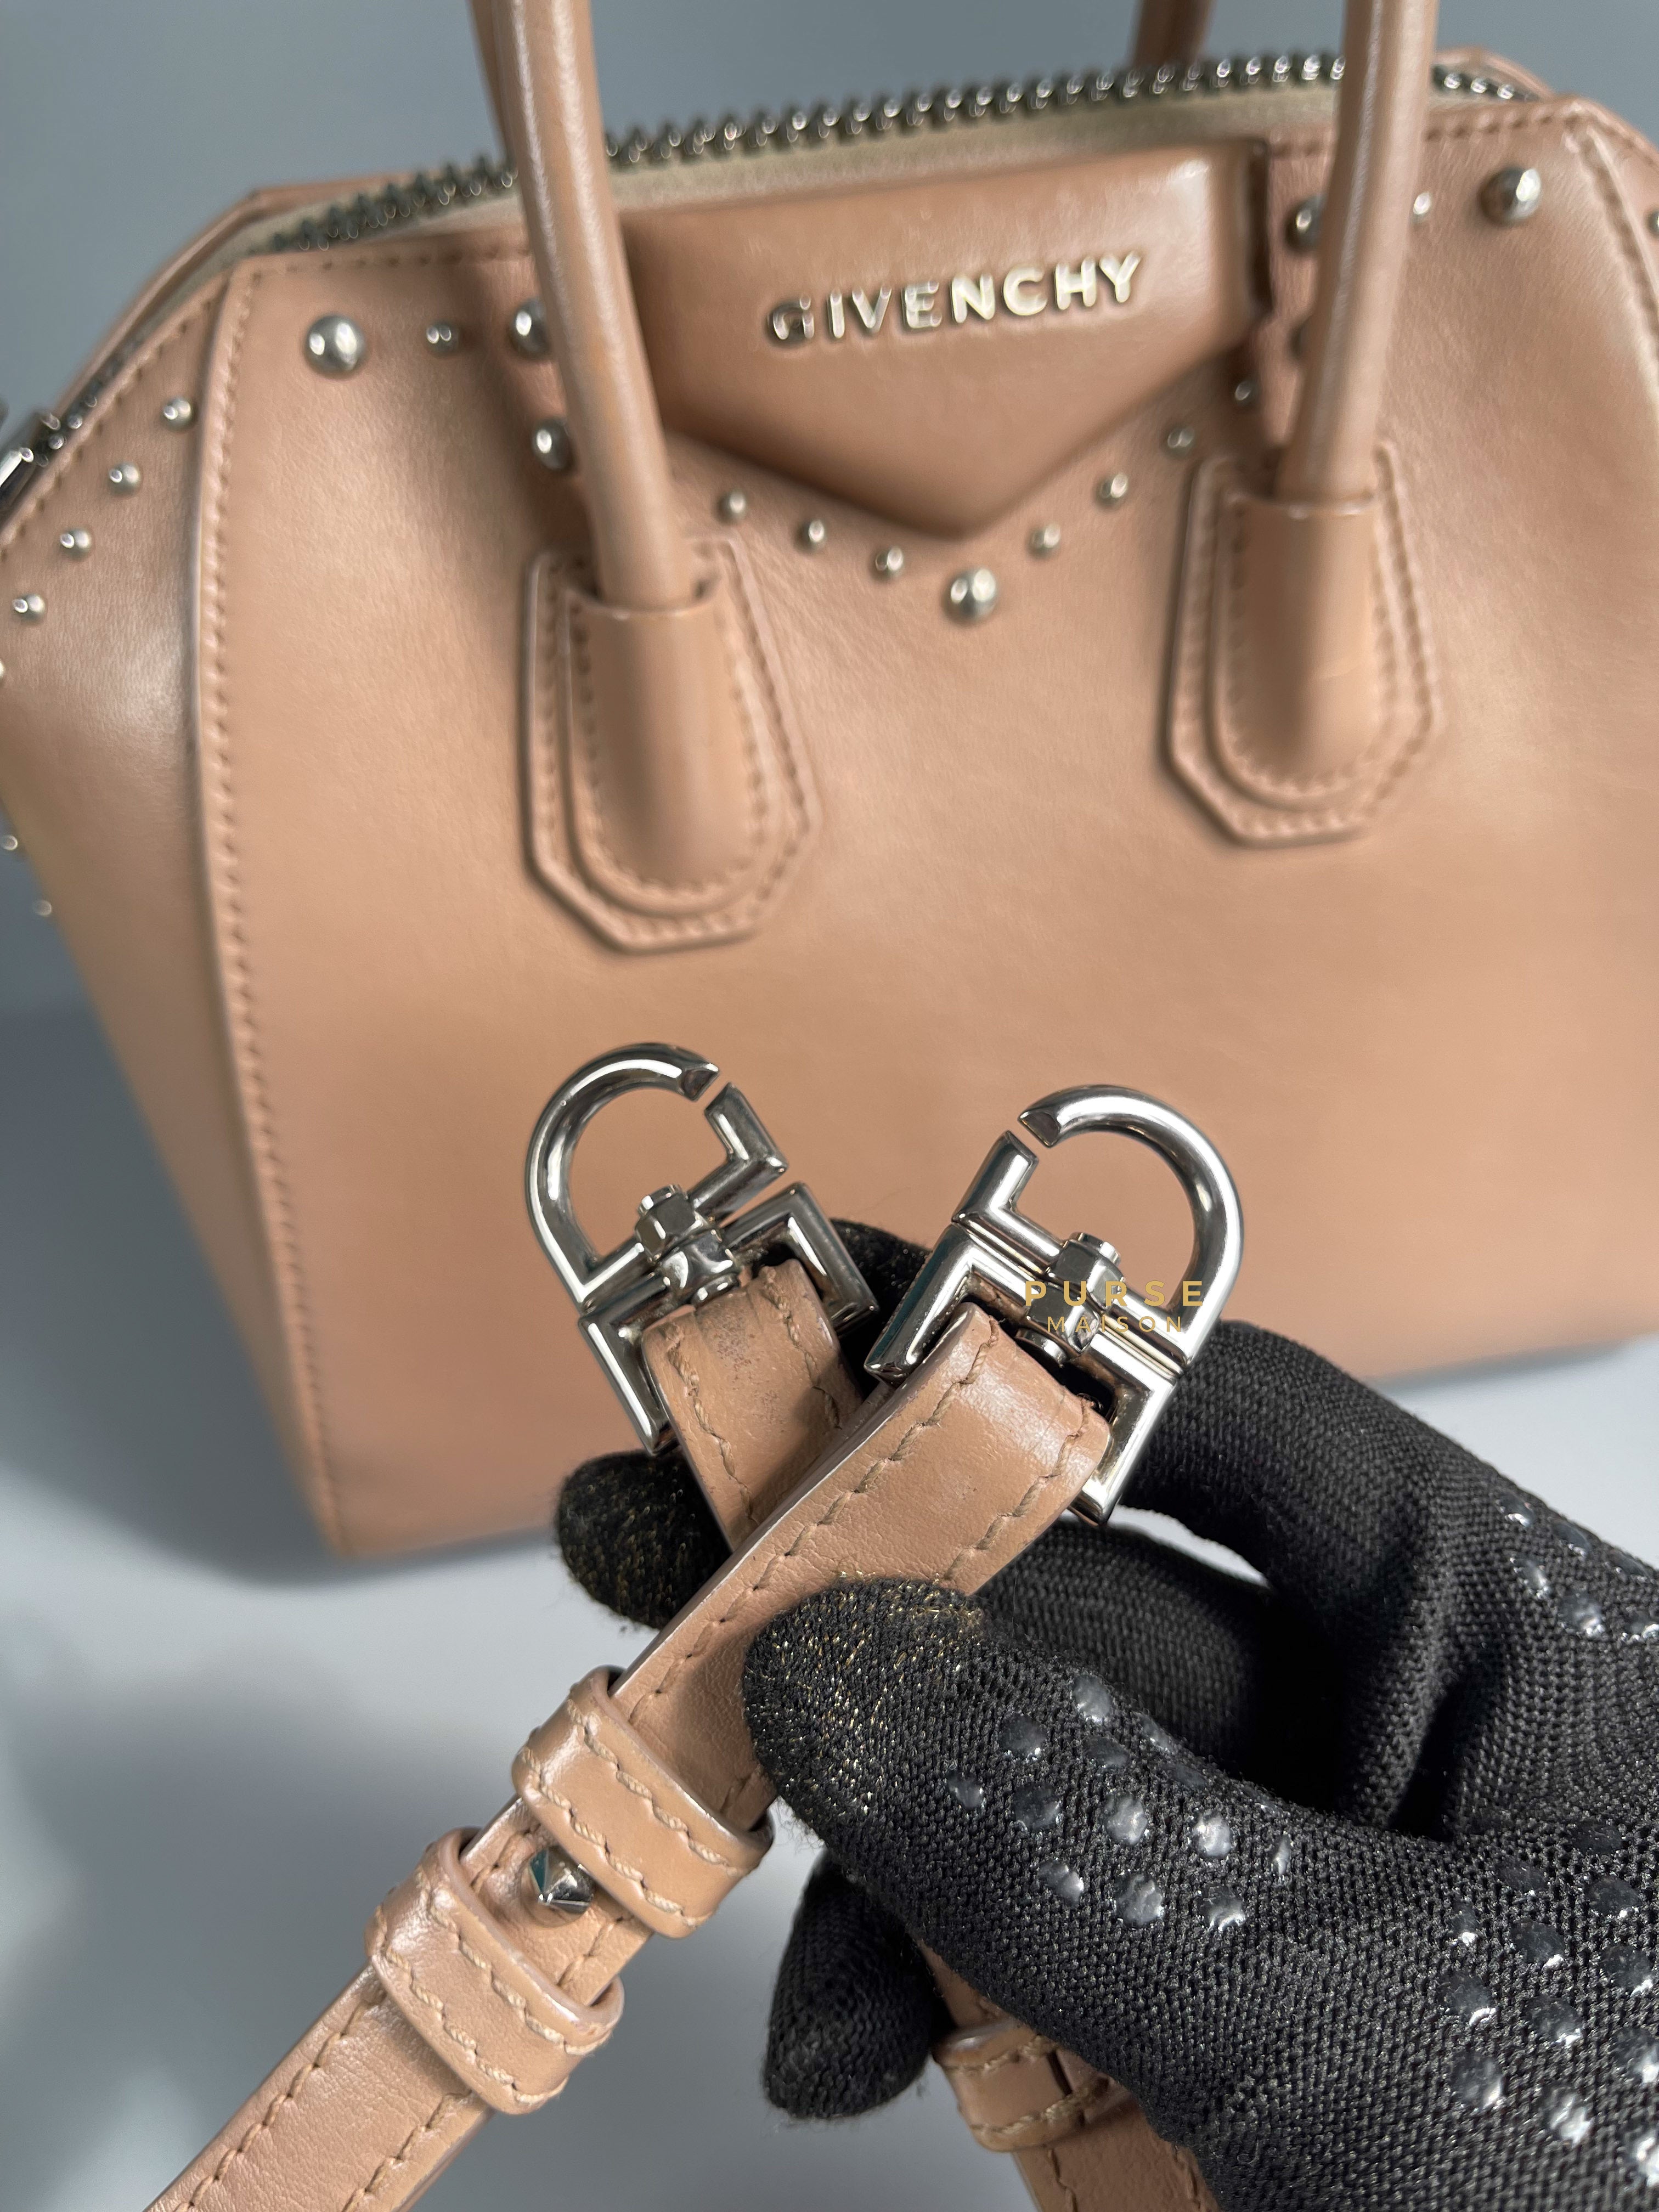 Givenchy Antigona Mini Studded Bag in Old Pink Calfskin Leather | Purse Maison Luxury Bags Shop